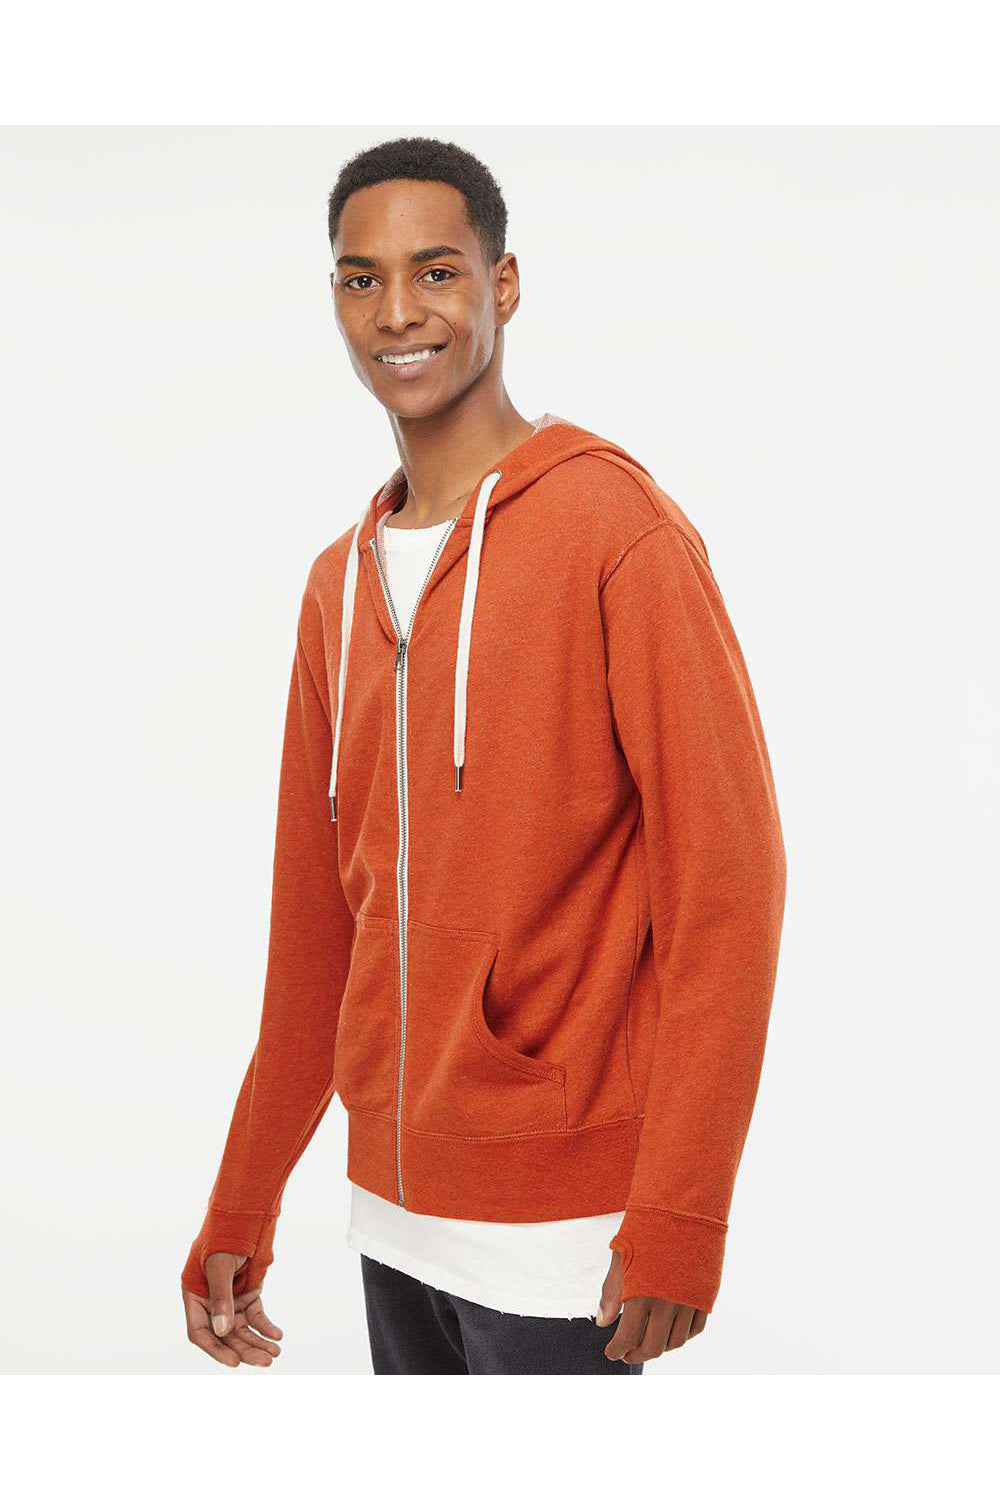 Independent Trading Co. PRM90HTZ Mens French Terry Full Zip Hooded Sweatshirt Hoodie Heather Burnt Orange Model Side